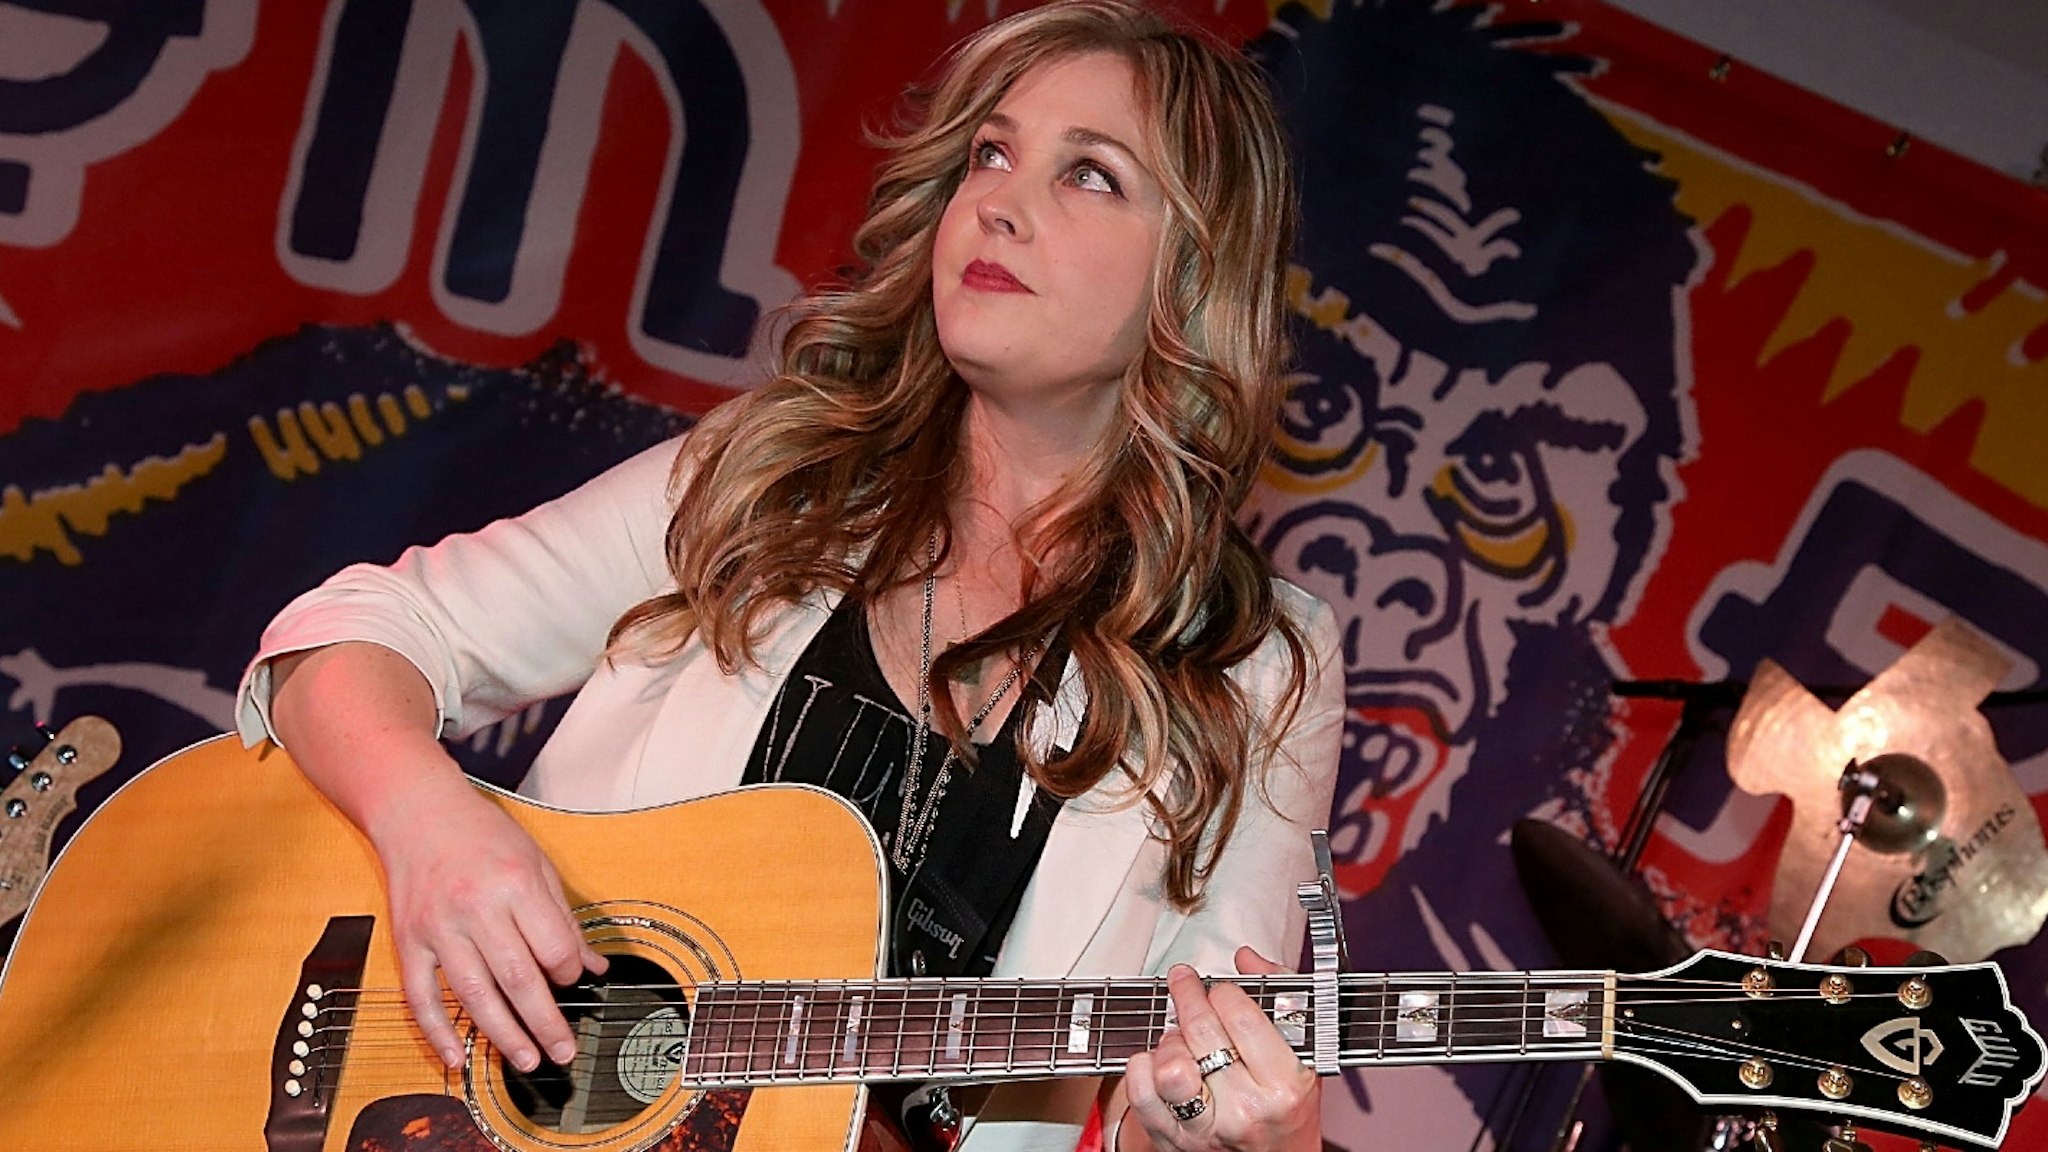 Sunny Sweeney performs in concert during Ray Benson's 65th birthday party at GSD&M during the South by Southwest Music Festival on March 15, 2016 in Austin, Texas.